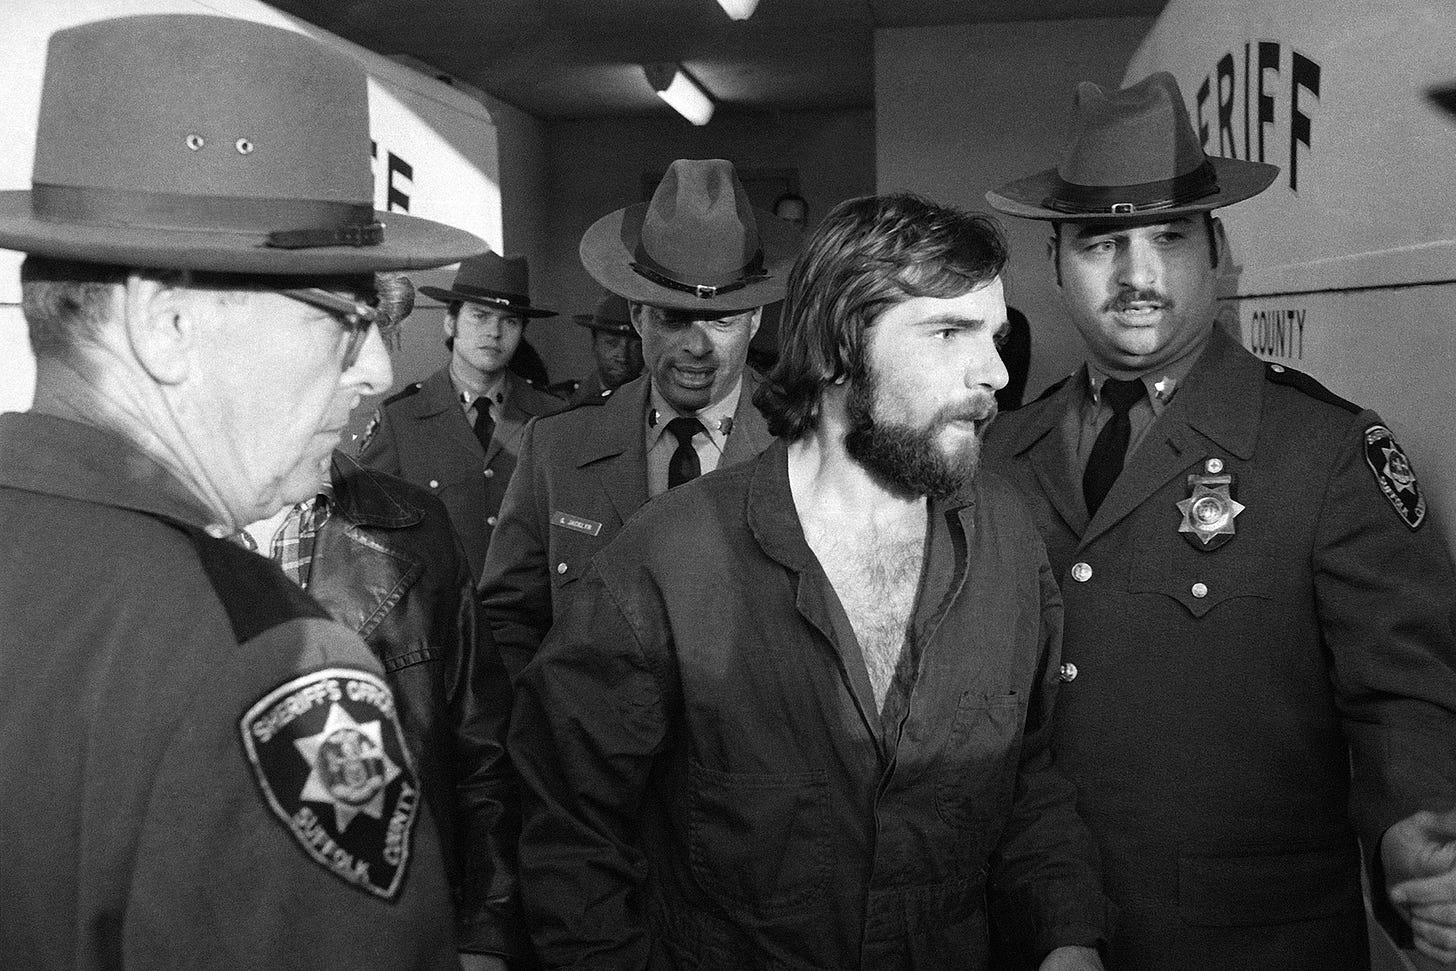 Ronald DeFeo, Murderer Who Inspired 'Amityville Horror,' Dead at 69